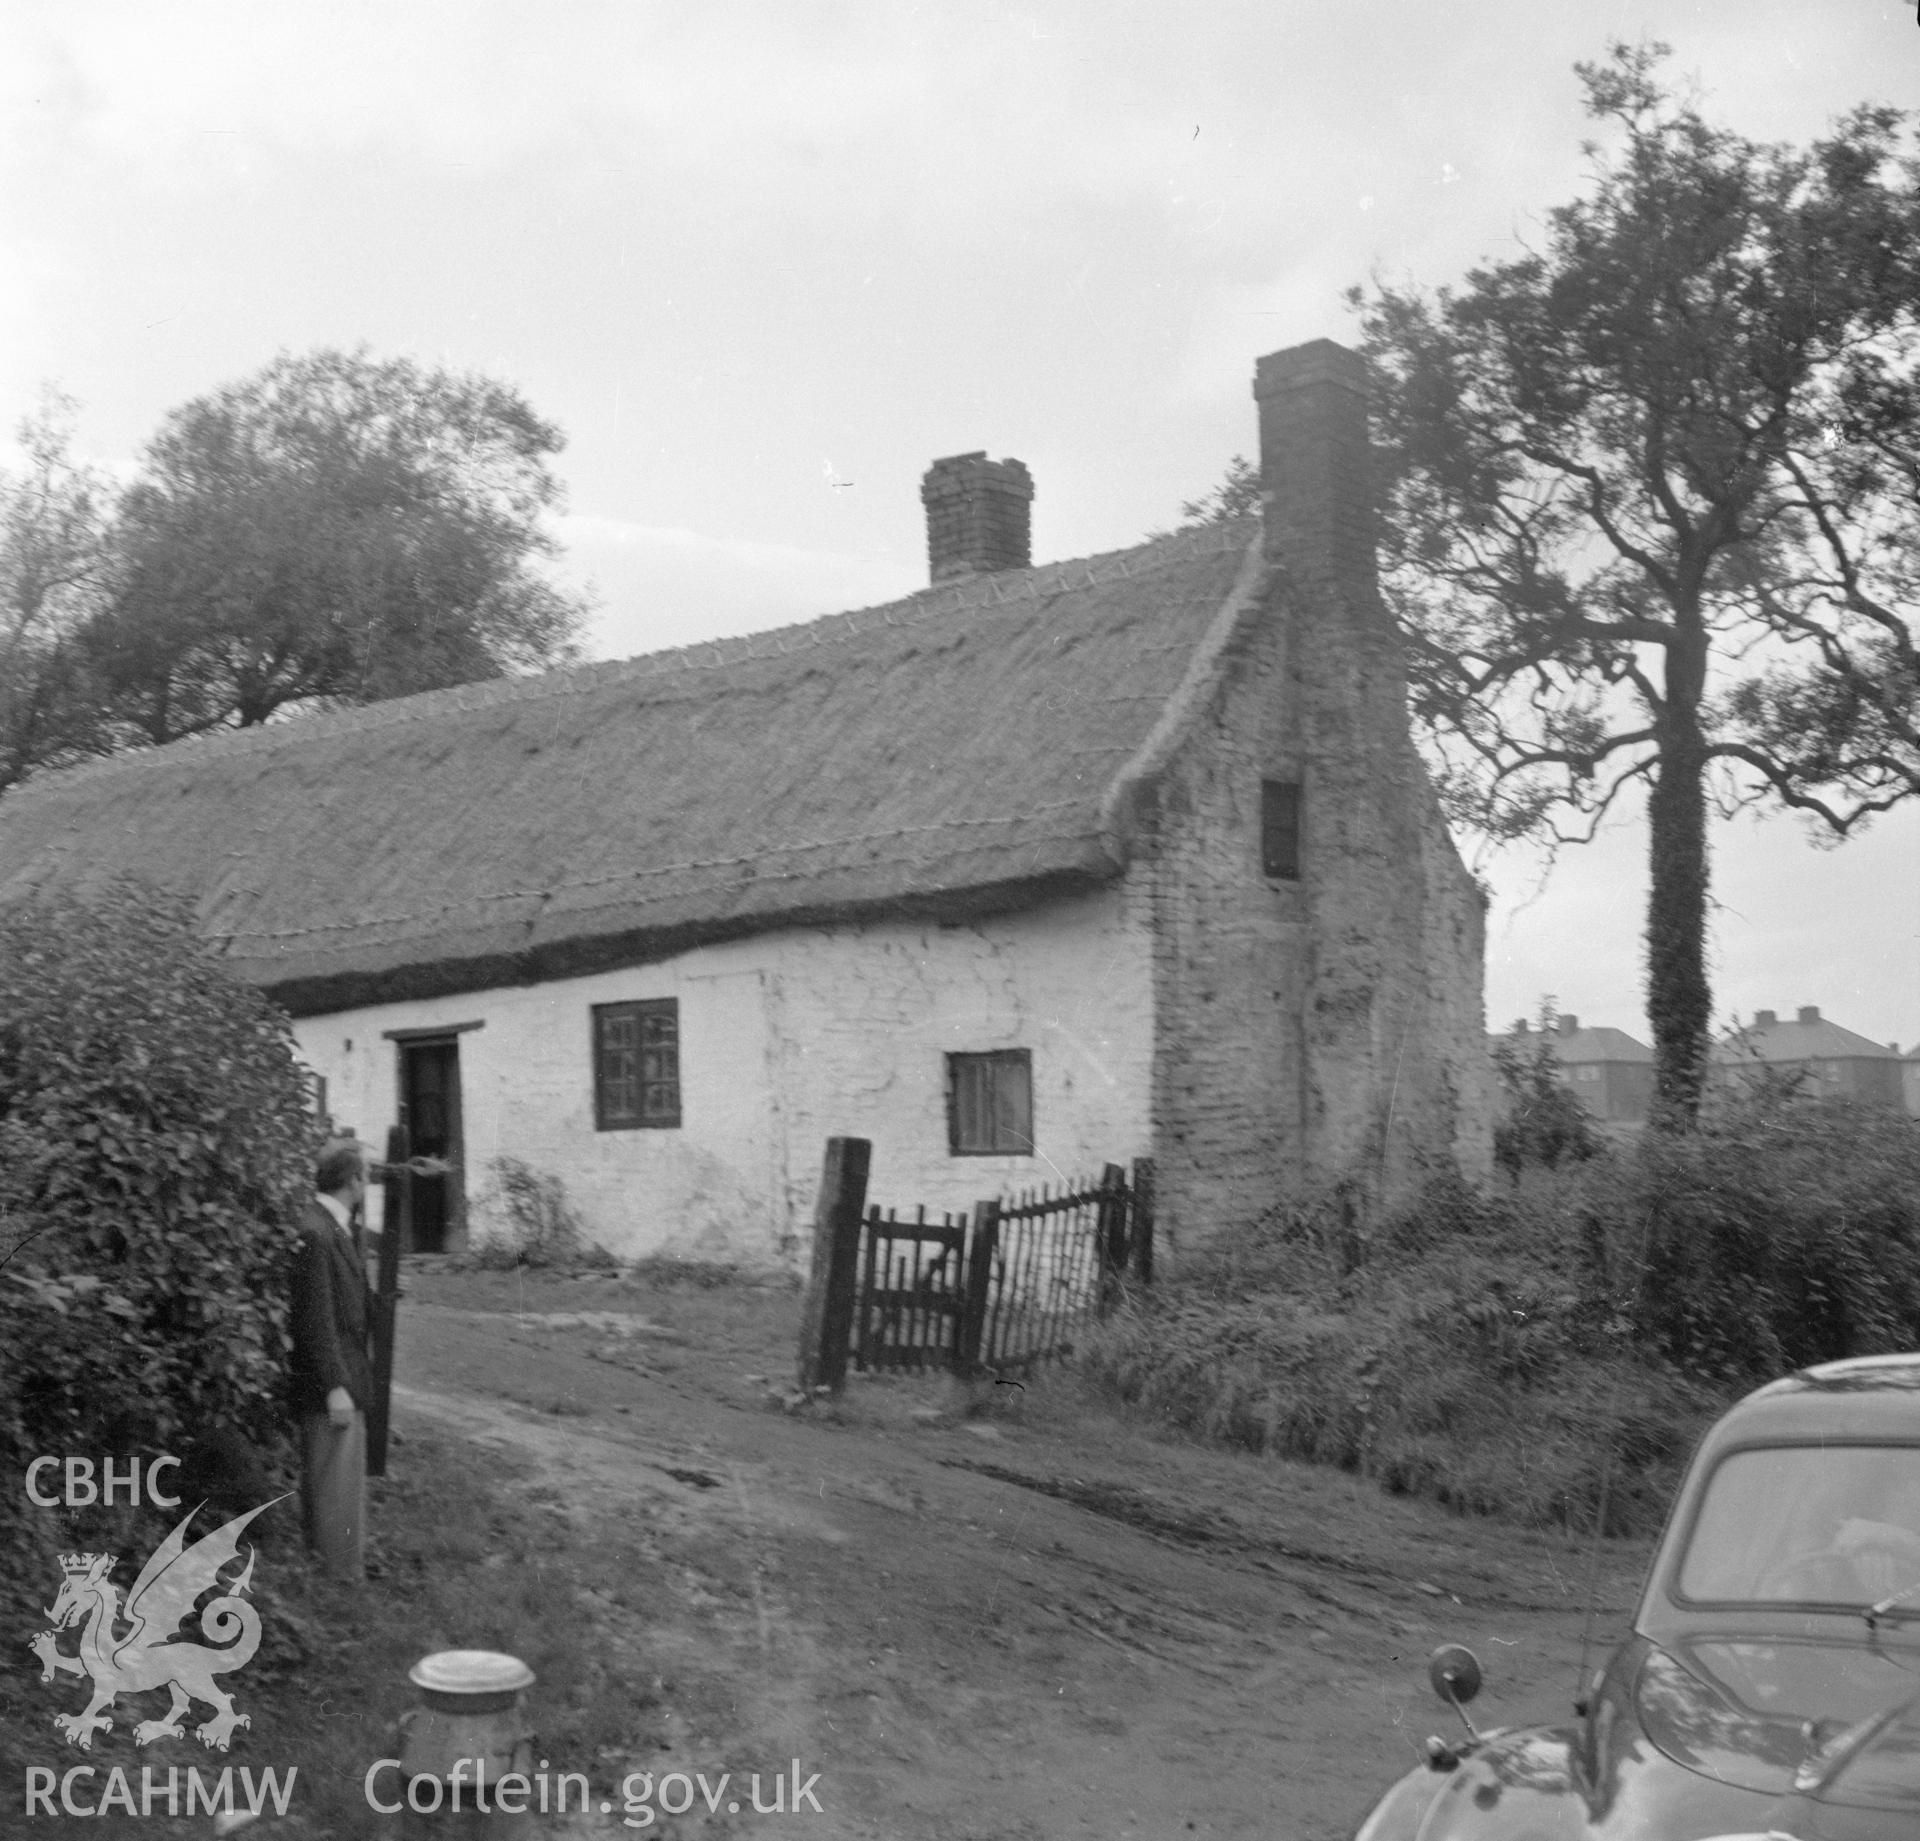 Digital copy of a nitrate negative showing an exterior view of a cruck house at Northop, Flintshire.